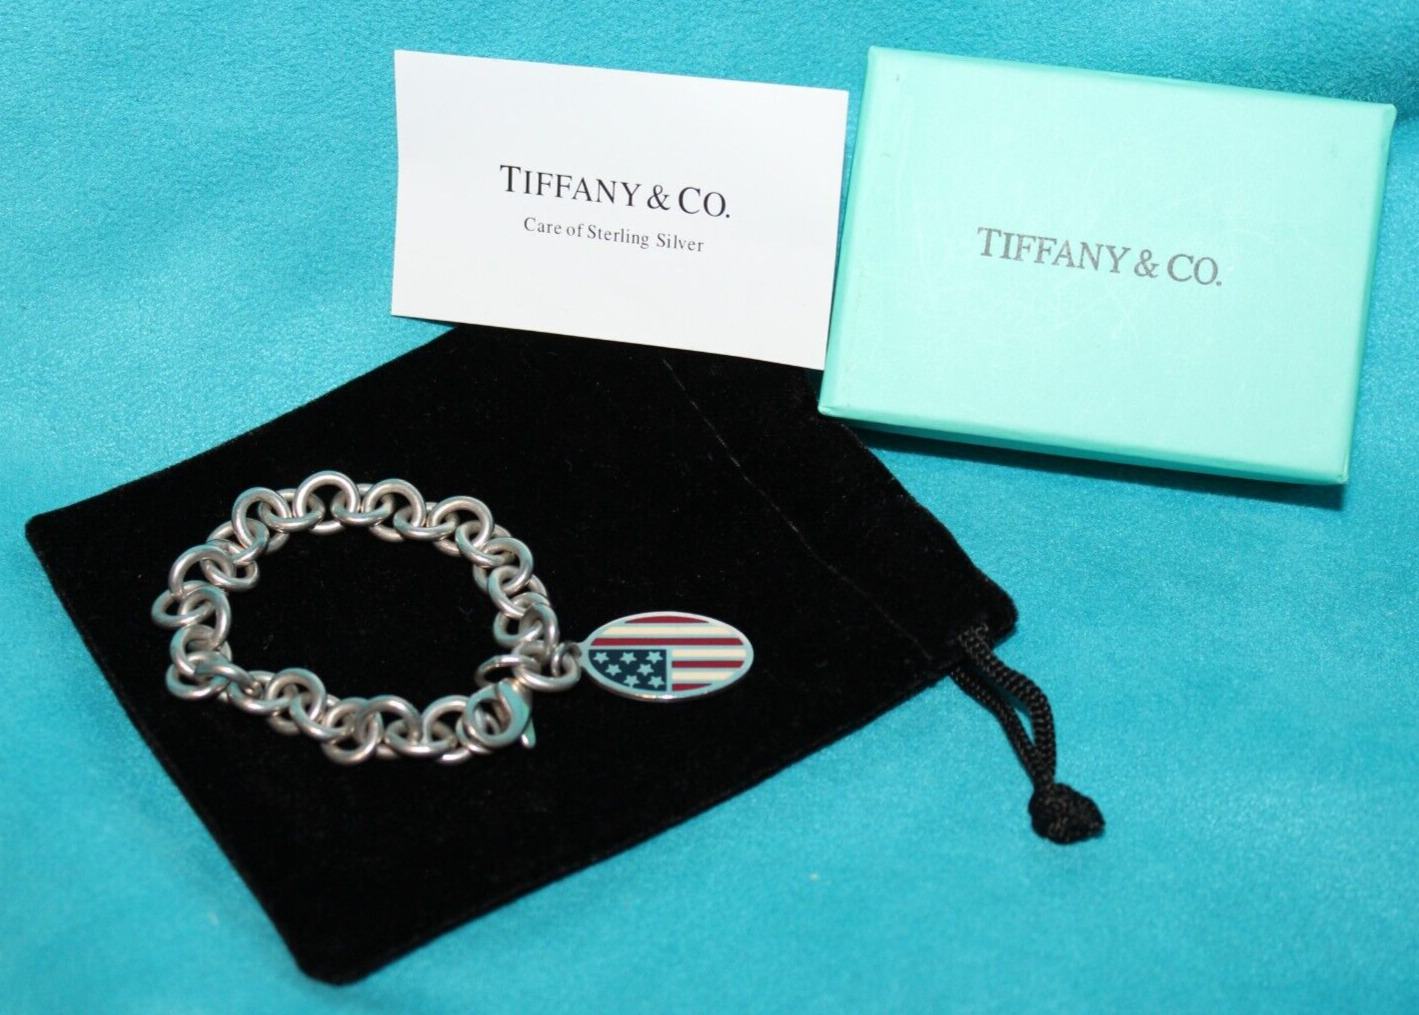 Tiffany & Co. American Flag 9/11 Tribute Sterling Silver Bracelet  7 1/2 inches